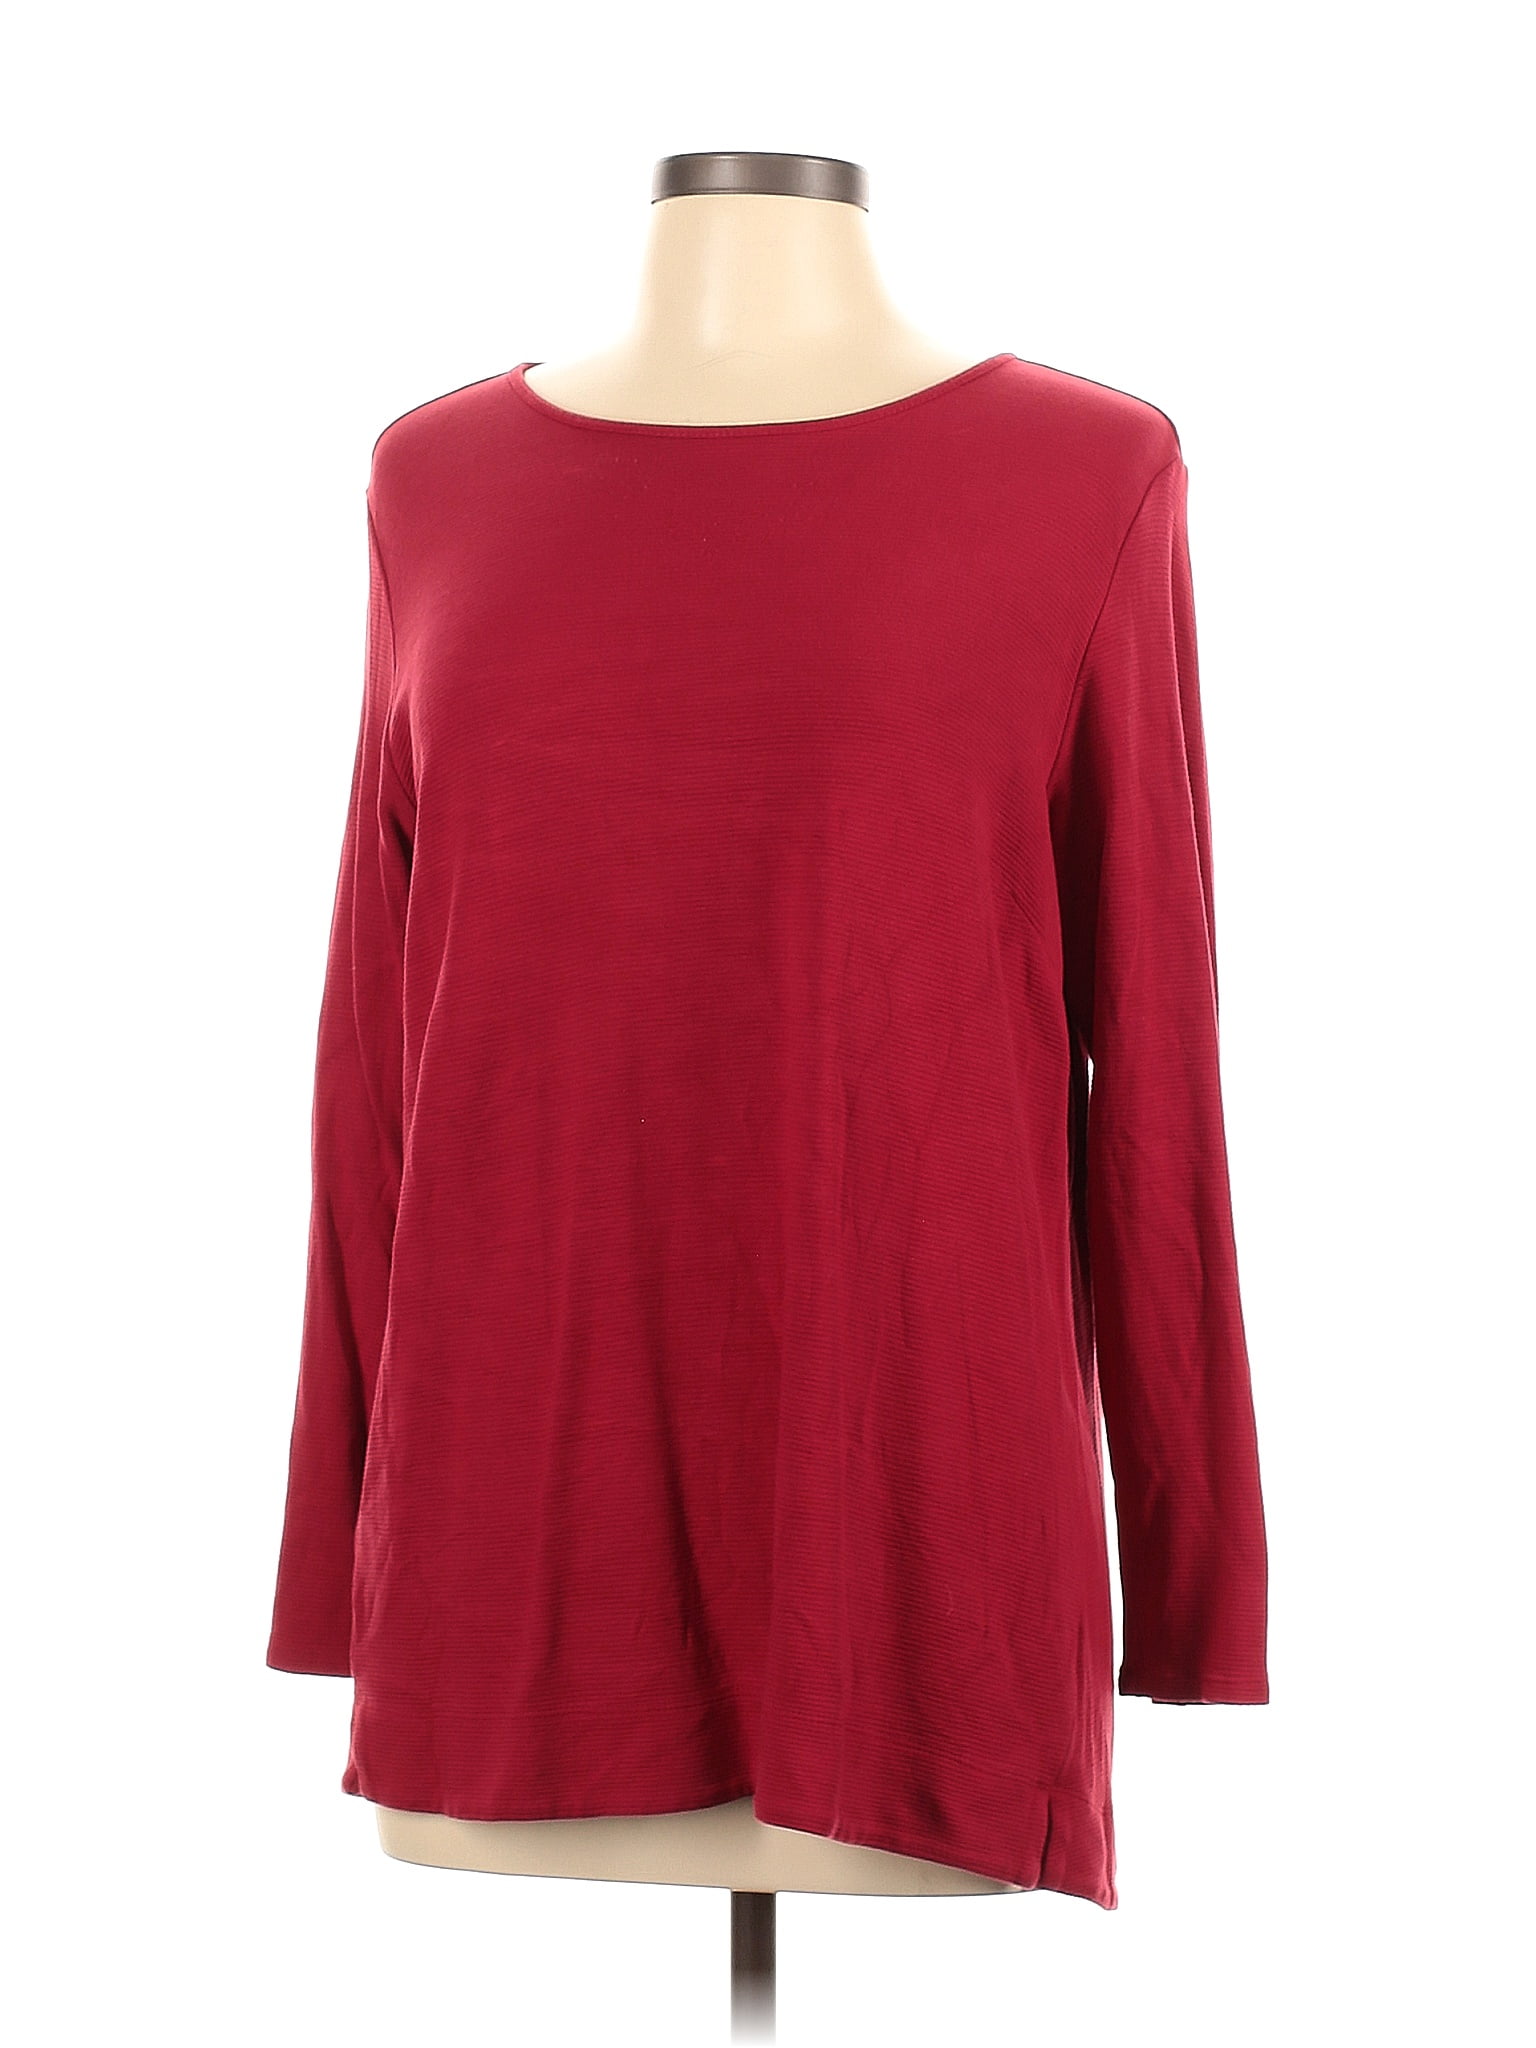 J.Jill 100% Cotton Solid Red Burgundy Long Sleeve Top Size 2X